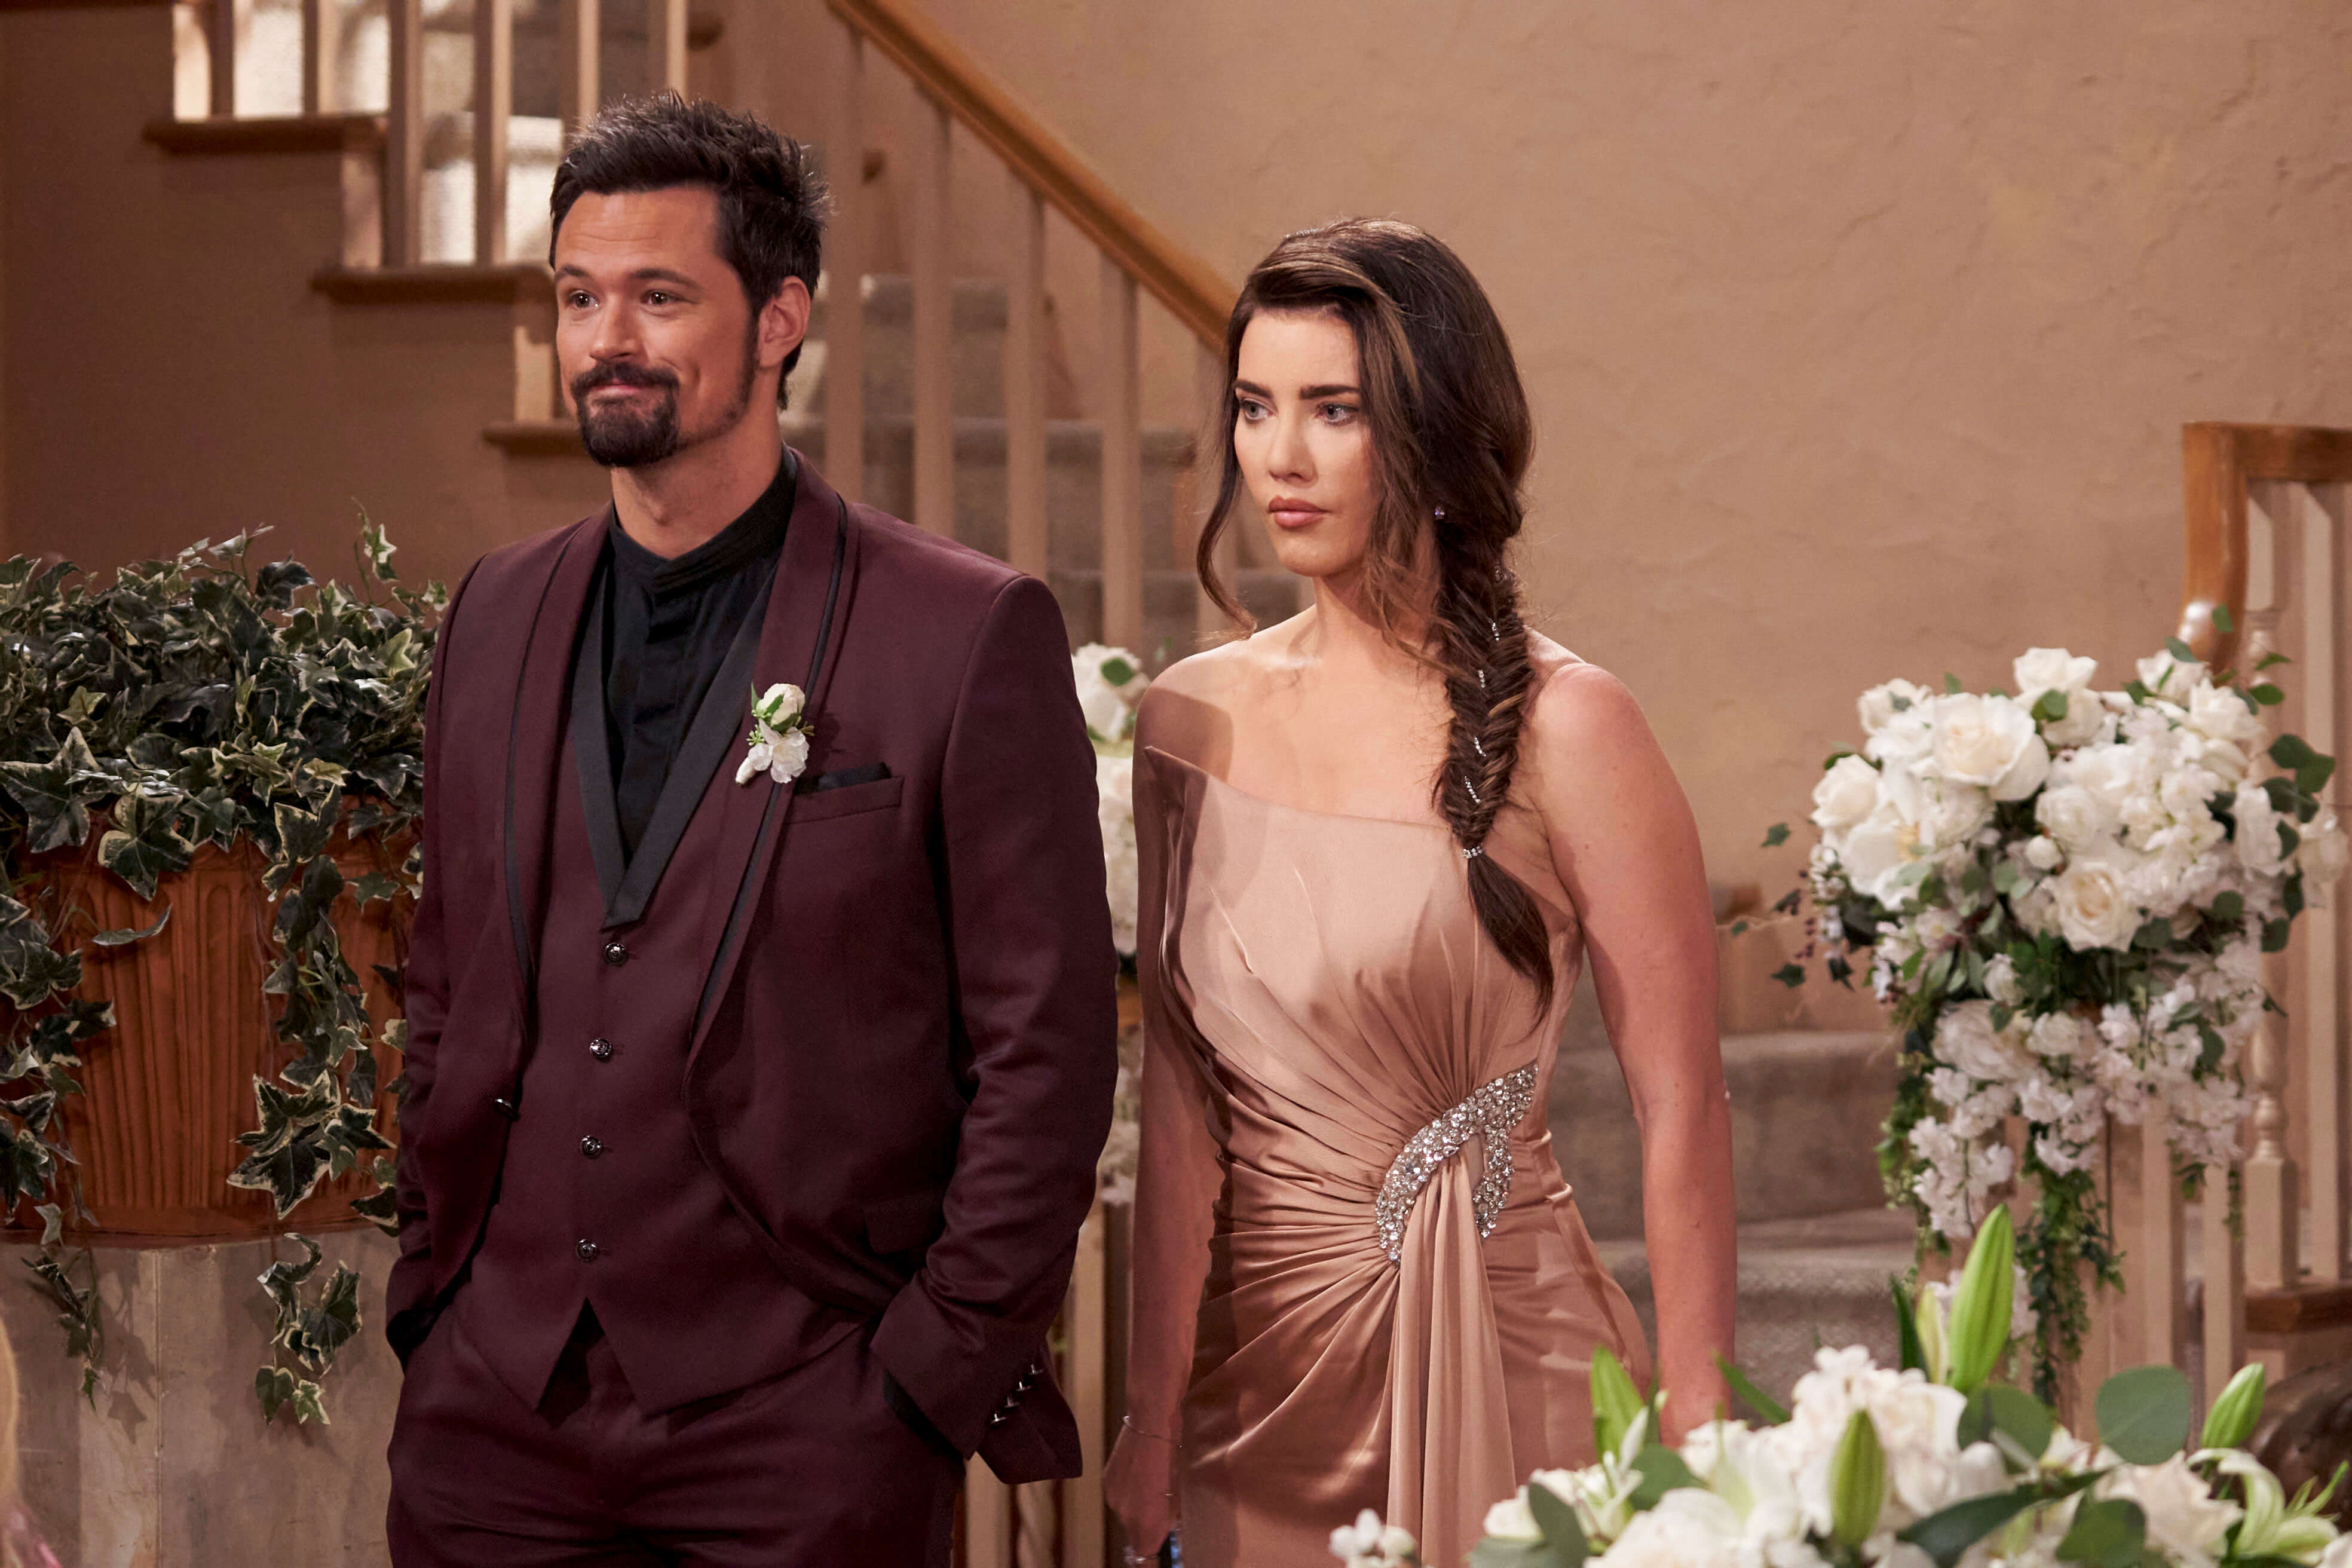 'The Bold and the Beautiful' star Matthew Atkinson in a burgundy suit, and Jacqueline MacInnes Wood in a gold dress; in a scene from the soap opera.